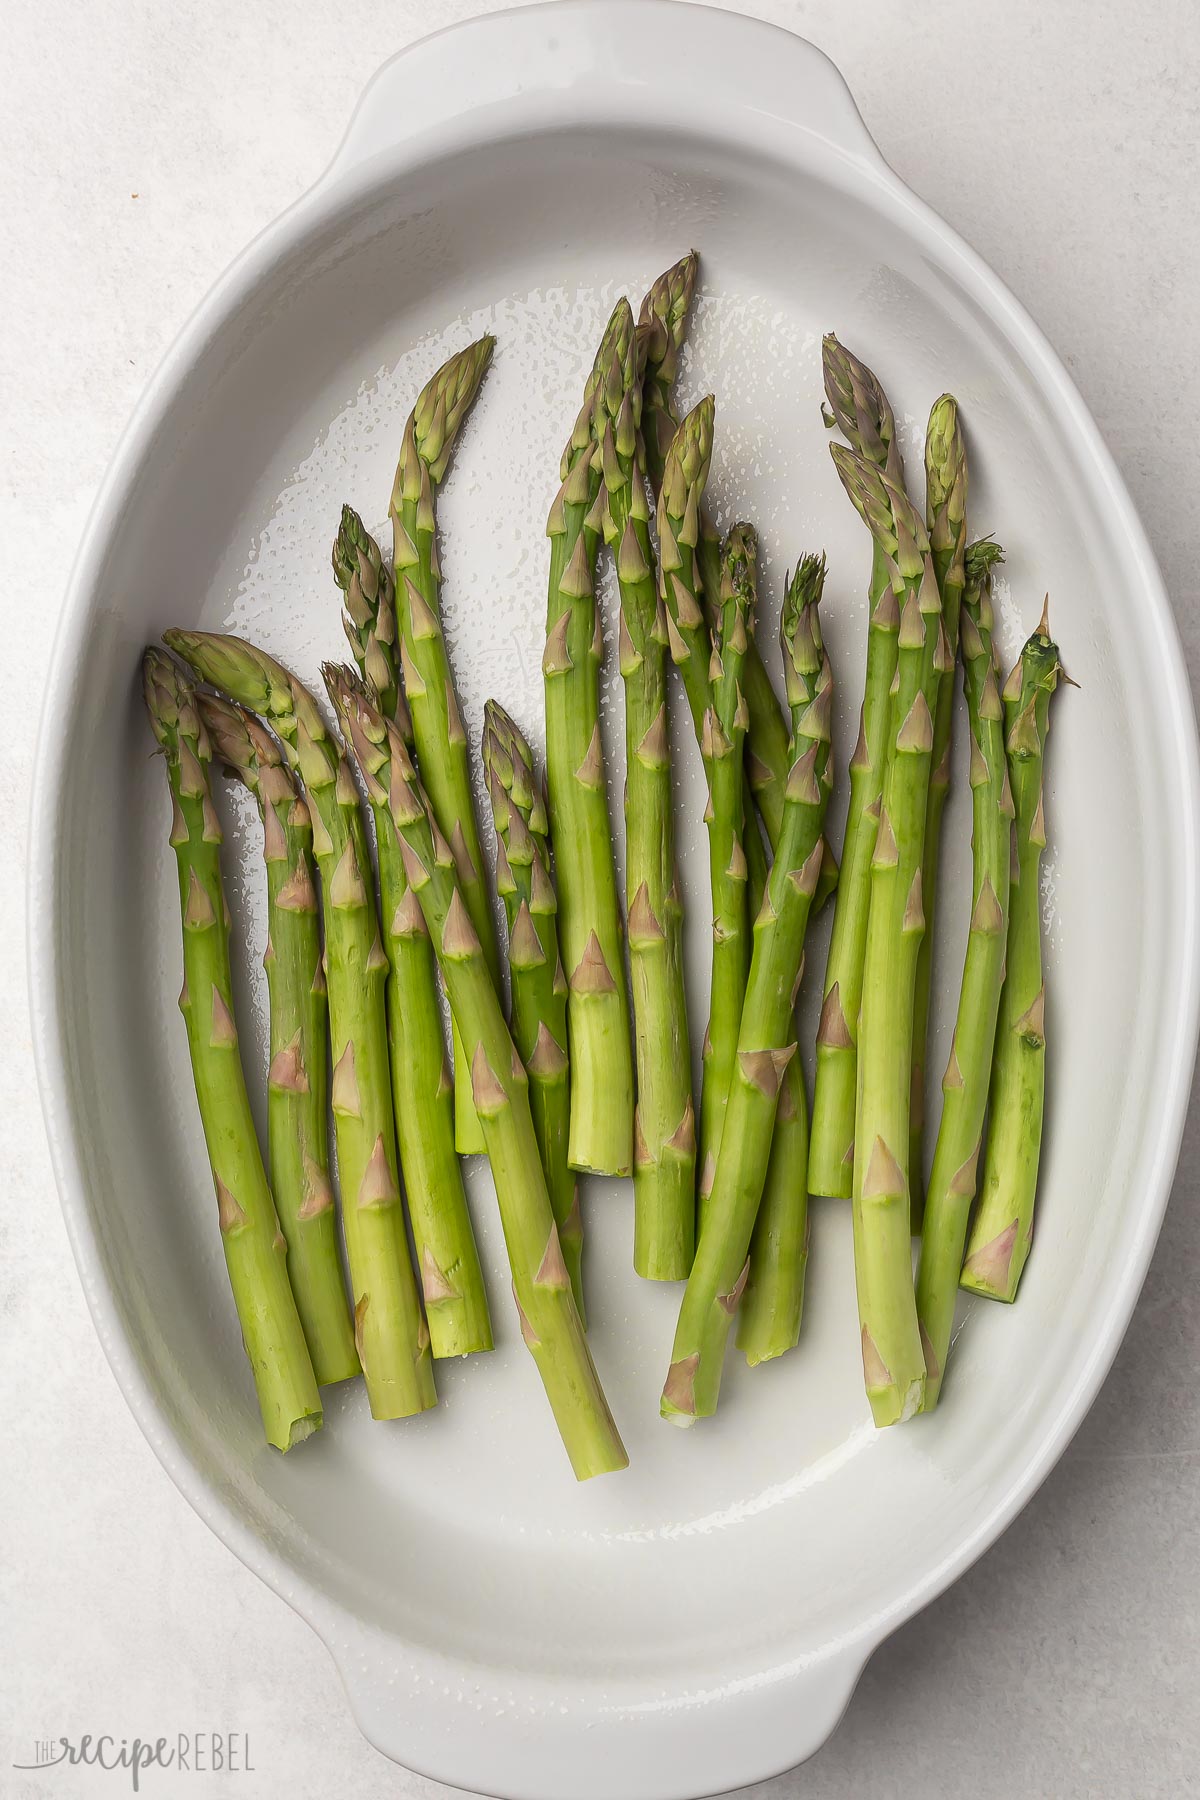 white greased dish with asparagus lying in it.